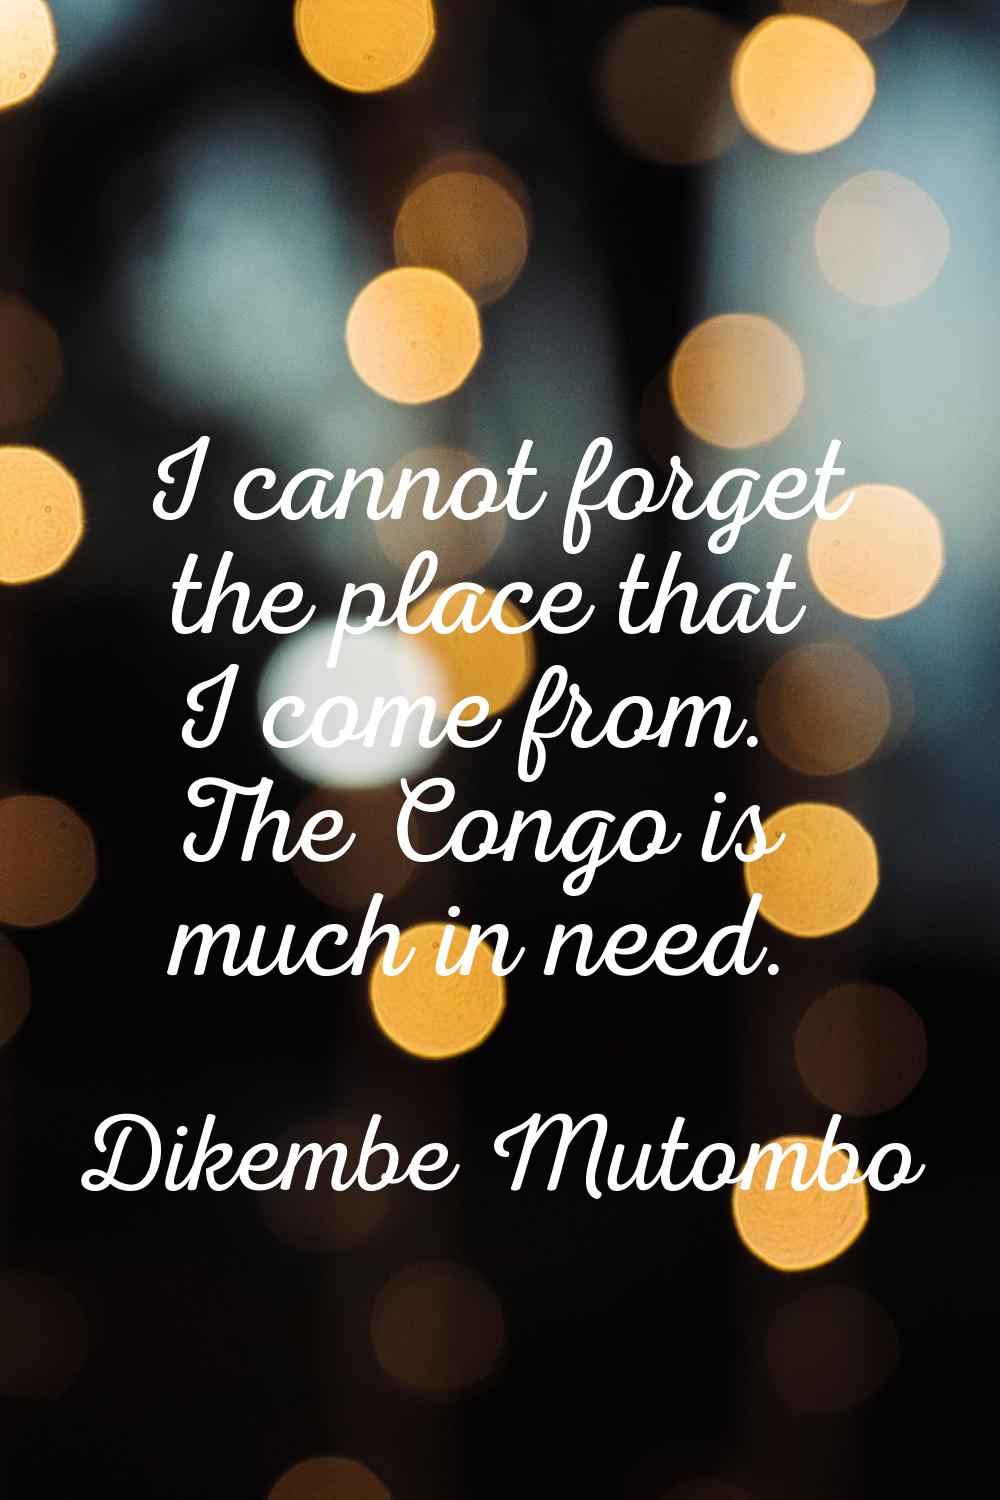 I cannot forget the place that I come from. The Congo is much in need.